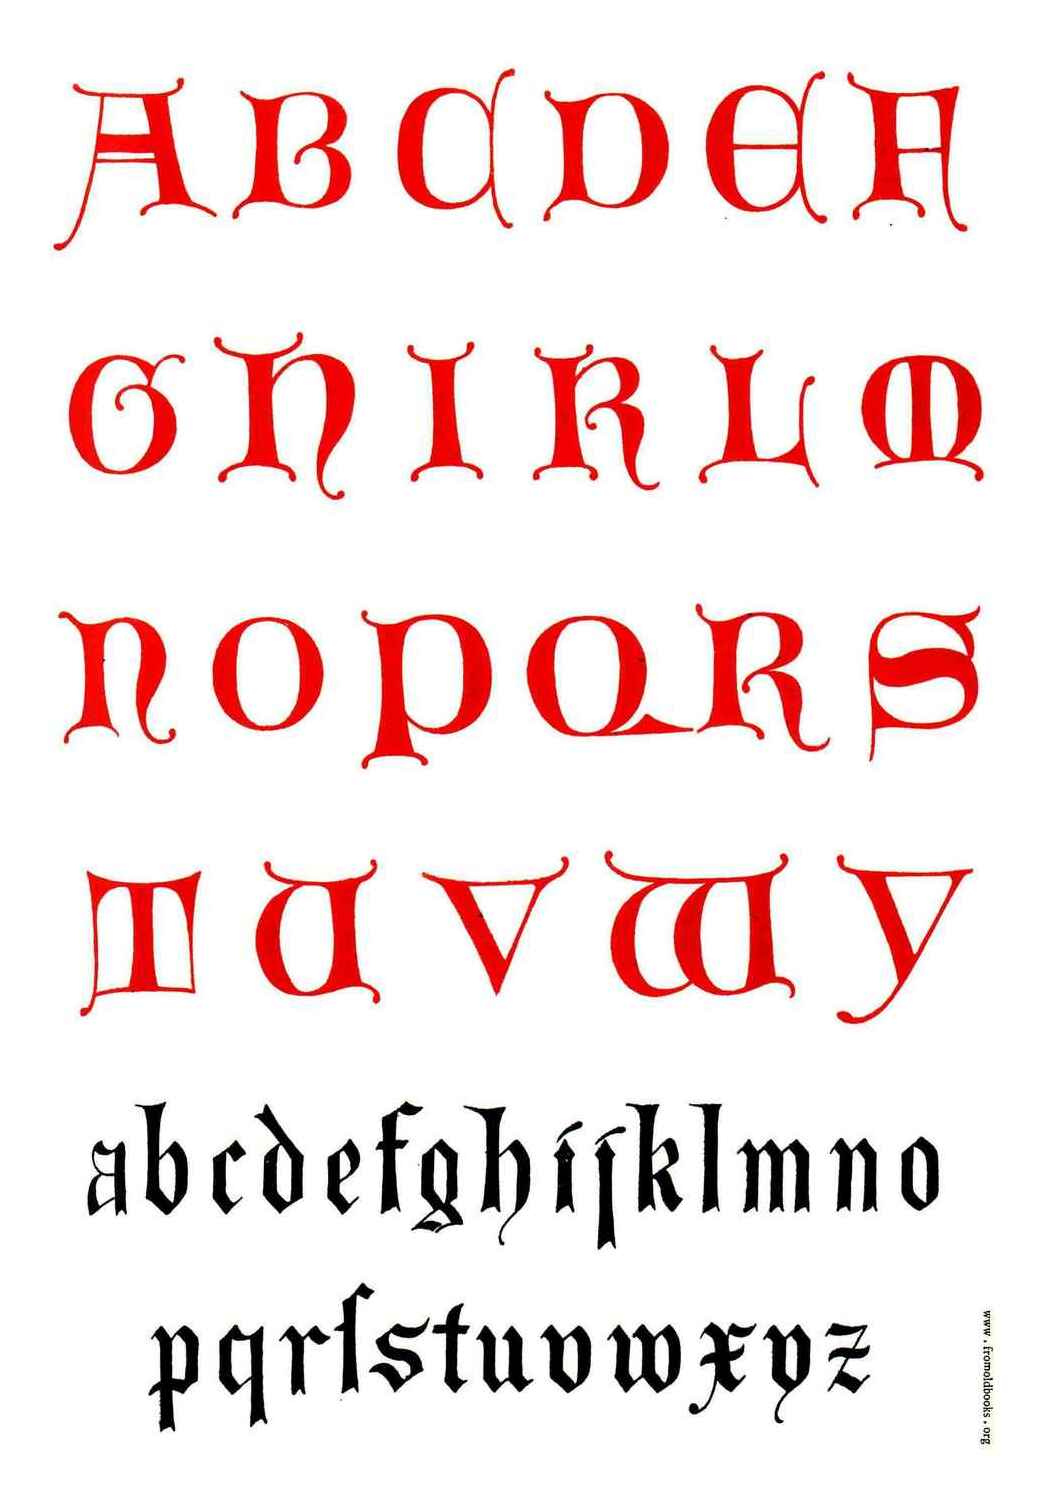 Plate 43, 14th century Lombardic alphabet, The Art of Illuminating As Practised in Europe from the Earliest Times, Tymms1860, modeled after earlier Lombardic capitals